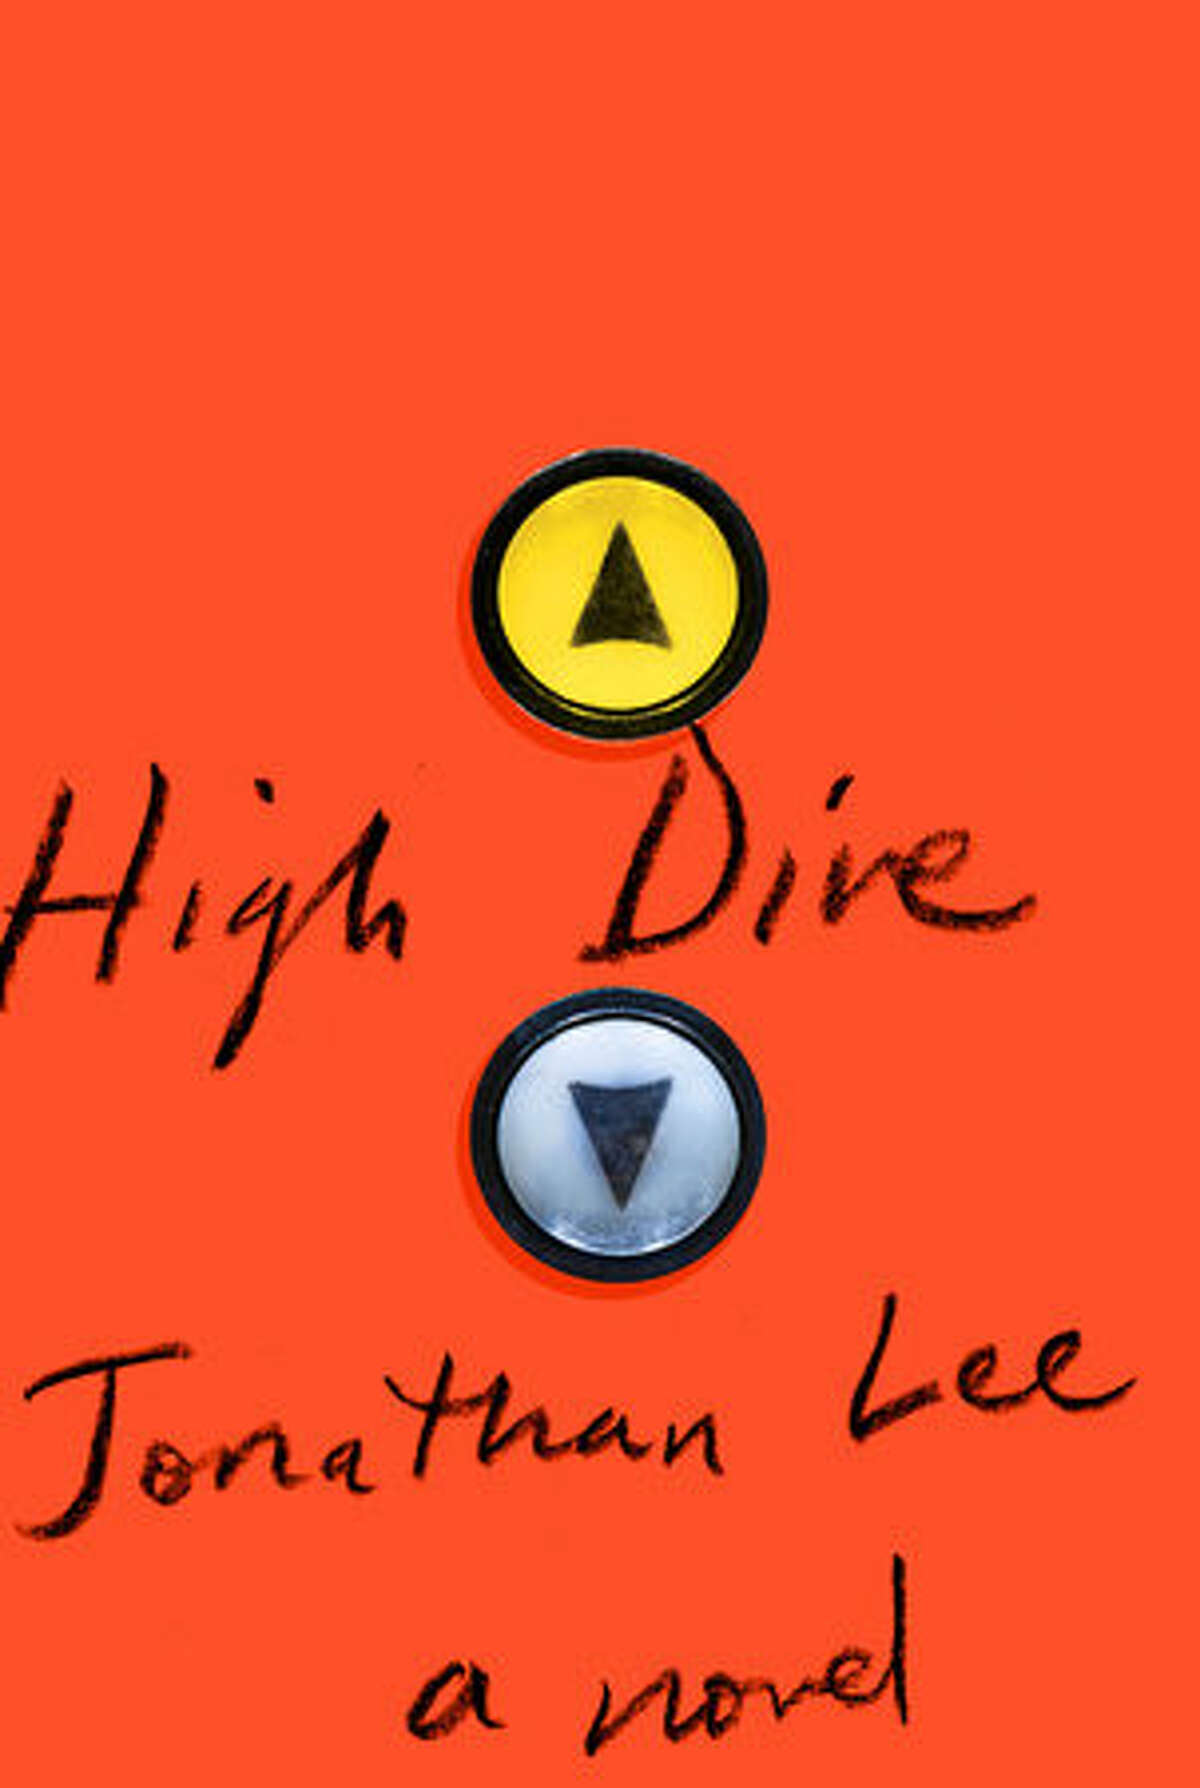 “High Dive,” by Jonathan Lee (March, Knopf Doubleday). Another book told from multiple points of view, “High Dive” revolves around one historical incident: the Irish Republican Army’s bombing of the Brighton Hotel in England in October 1984, an attempt to kill Prime Minister Margaret Thatcher and her cabinet. But this is just a jumping off point for a plot that pulls in fiction, comedy and tragedy before its done. Remember, Marlon James won the Man Booker Prize for his fictionalized account of the attempted assassination of Bob Marley in “A Brief History of Seven Killings.” Is this a niche trend?